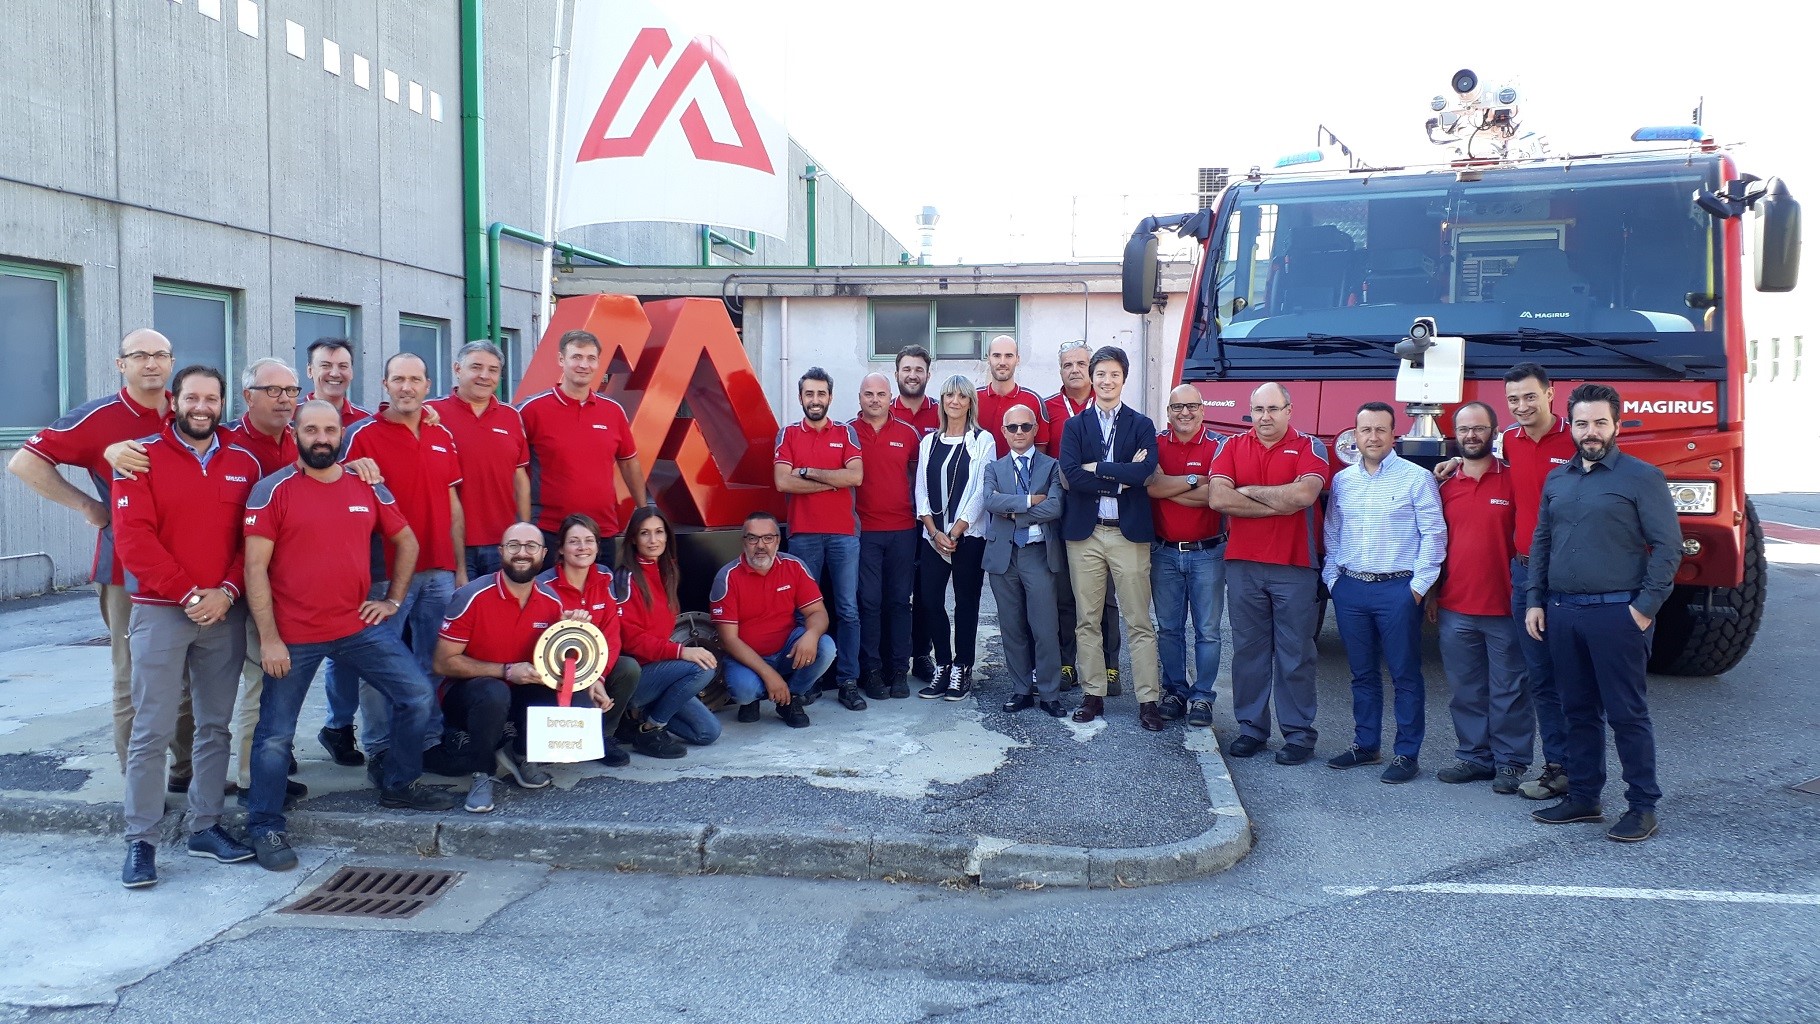 Employees at the Magrius Plant in Brescia following their Bronze level WCM award